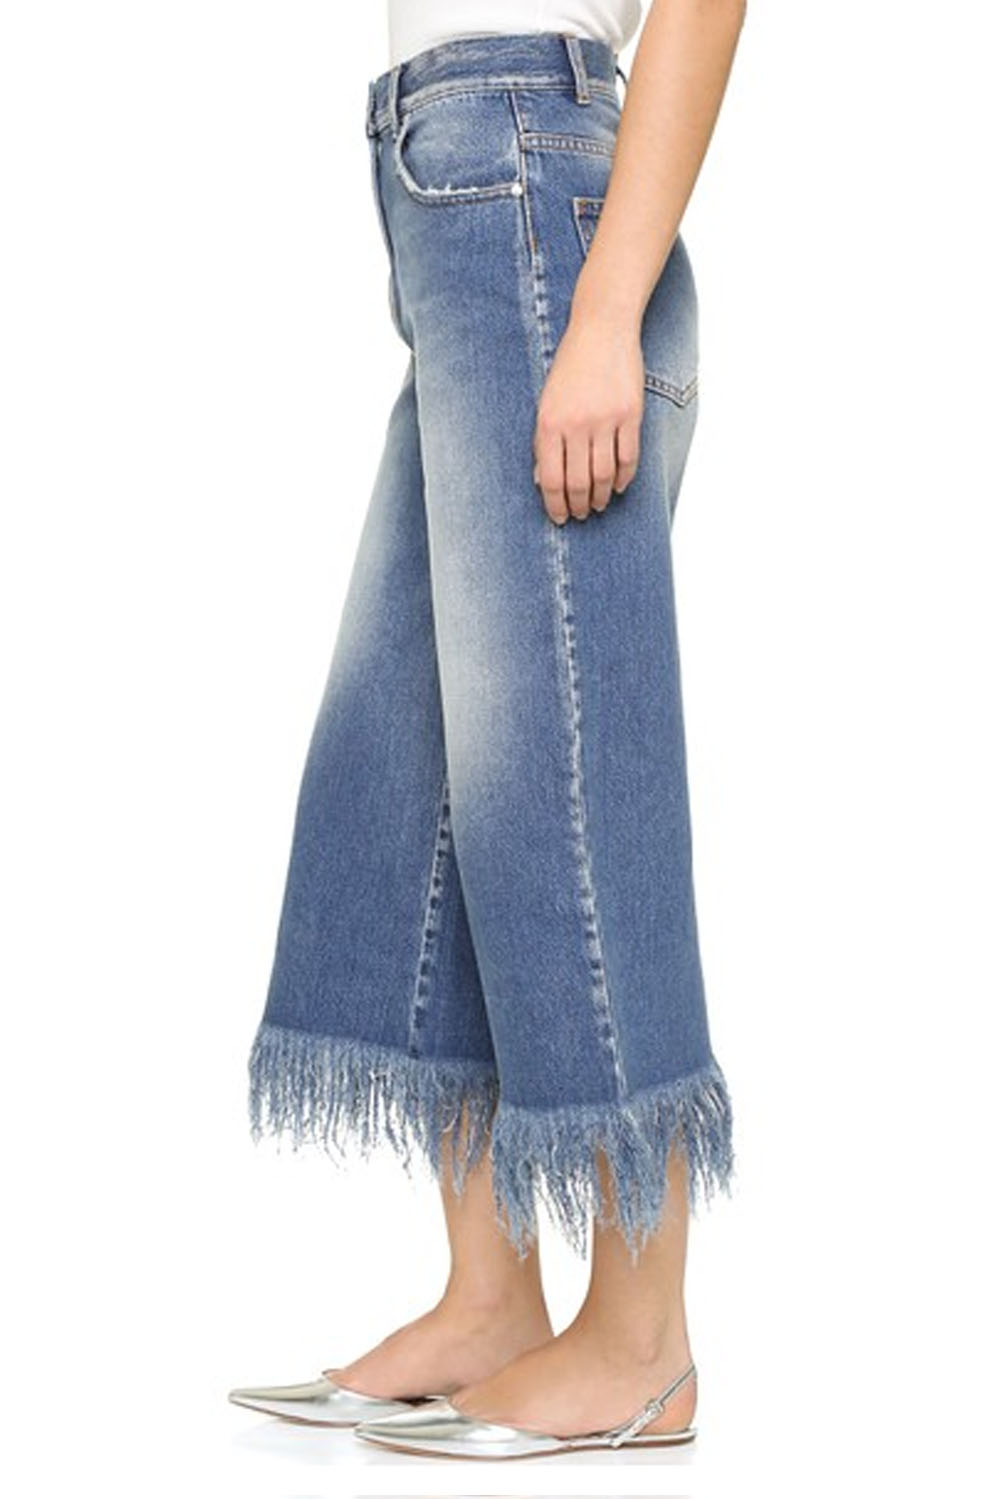 MSGM jeans, $351, from Shopbop.